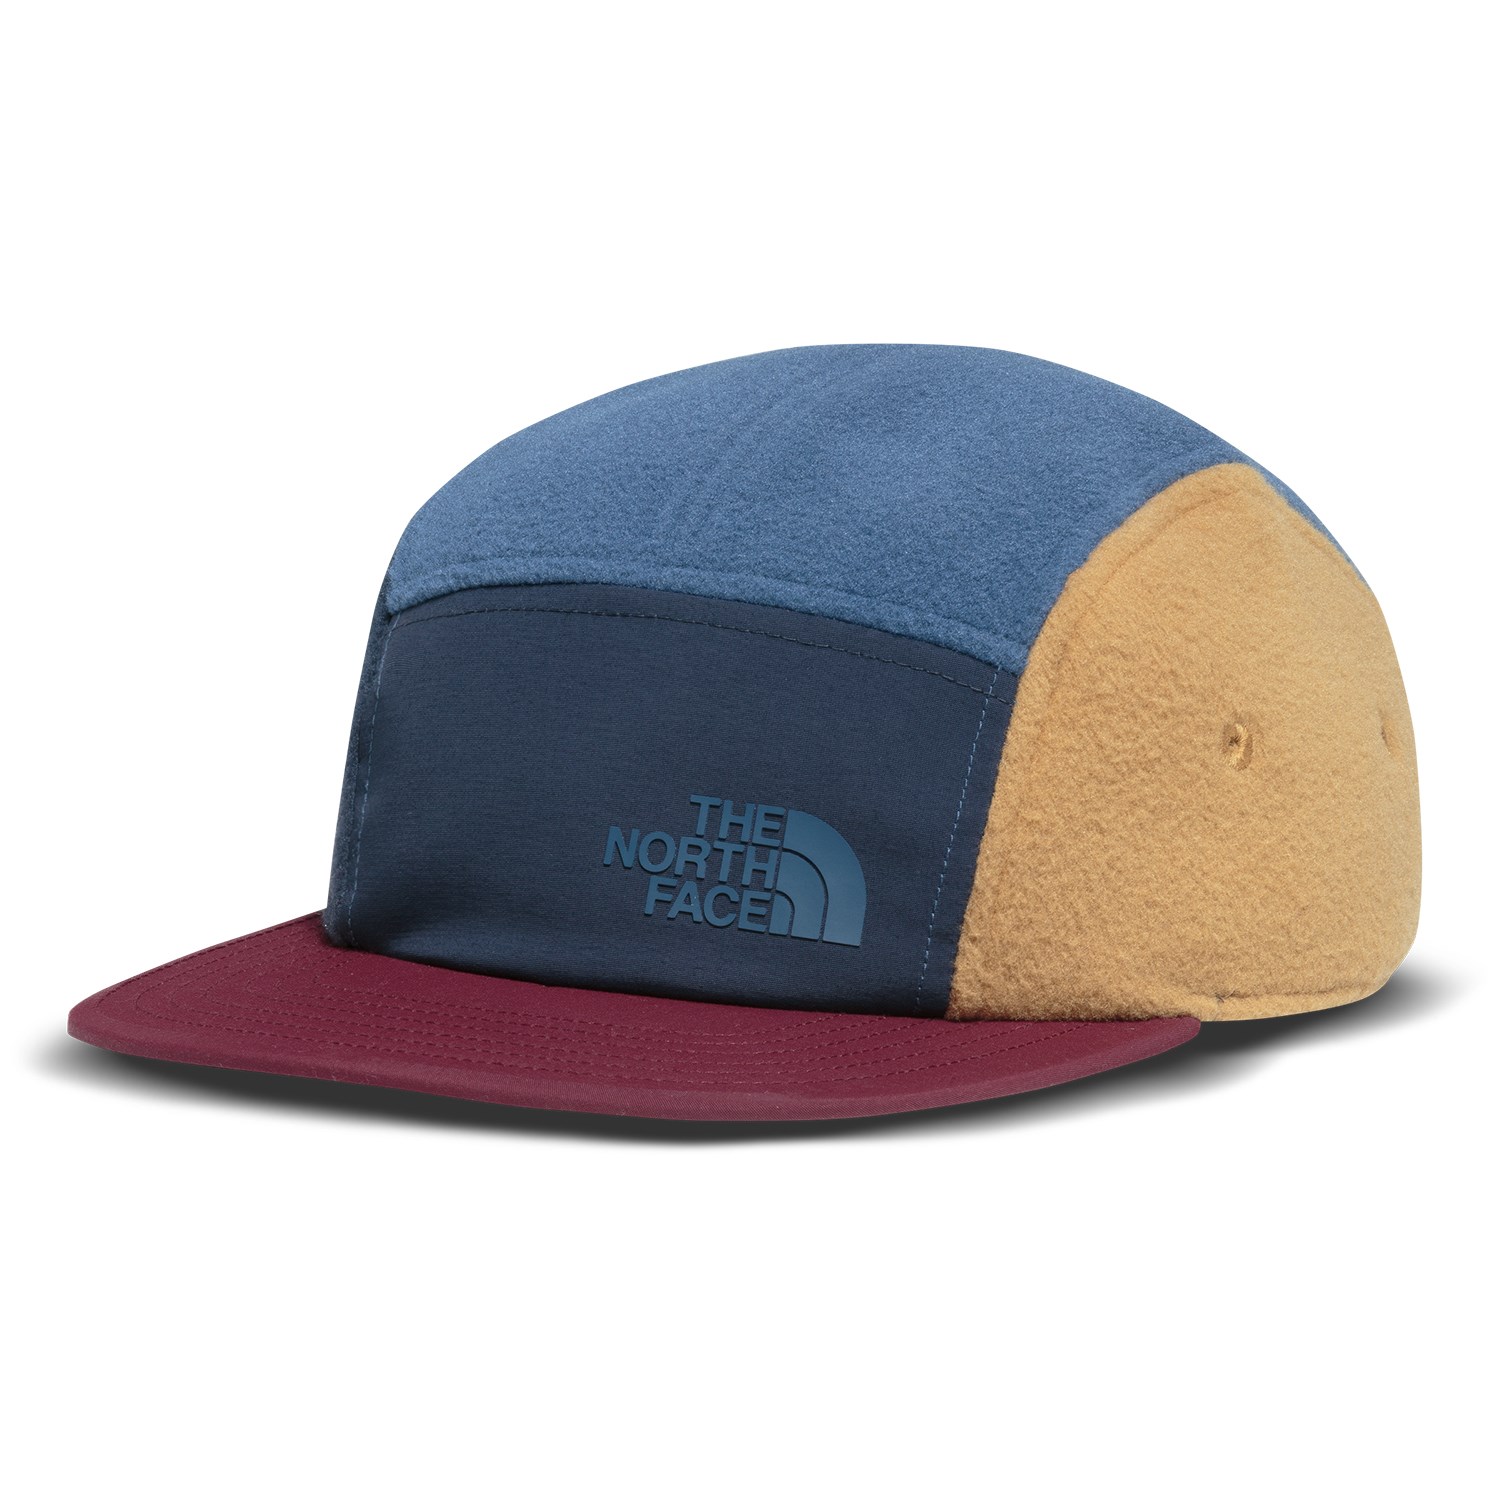 The North Face Panel Hat | evo